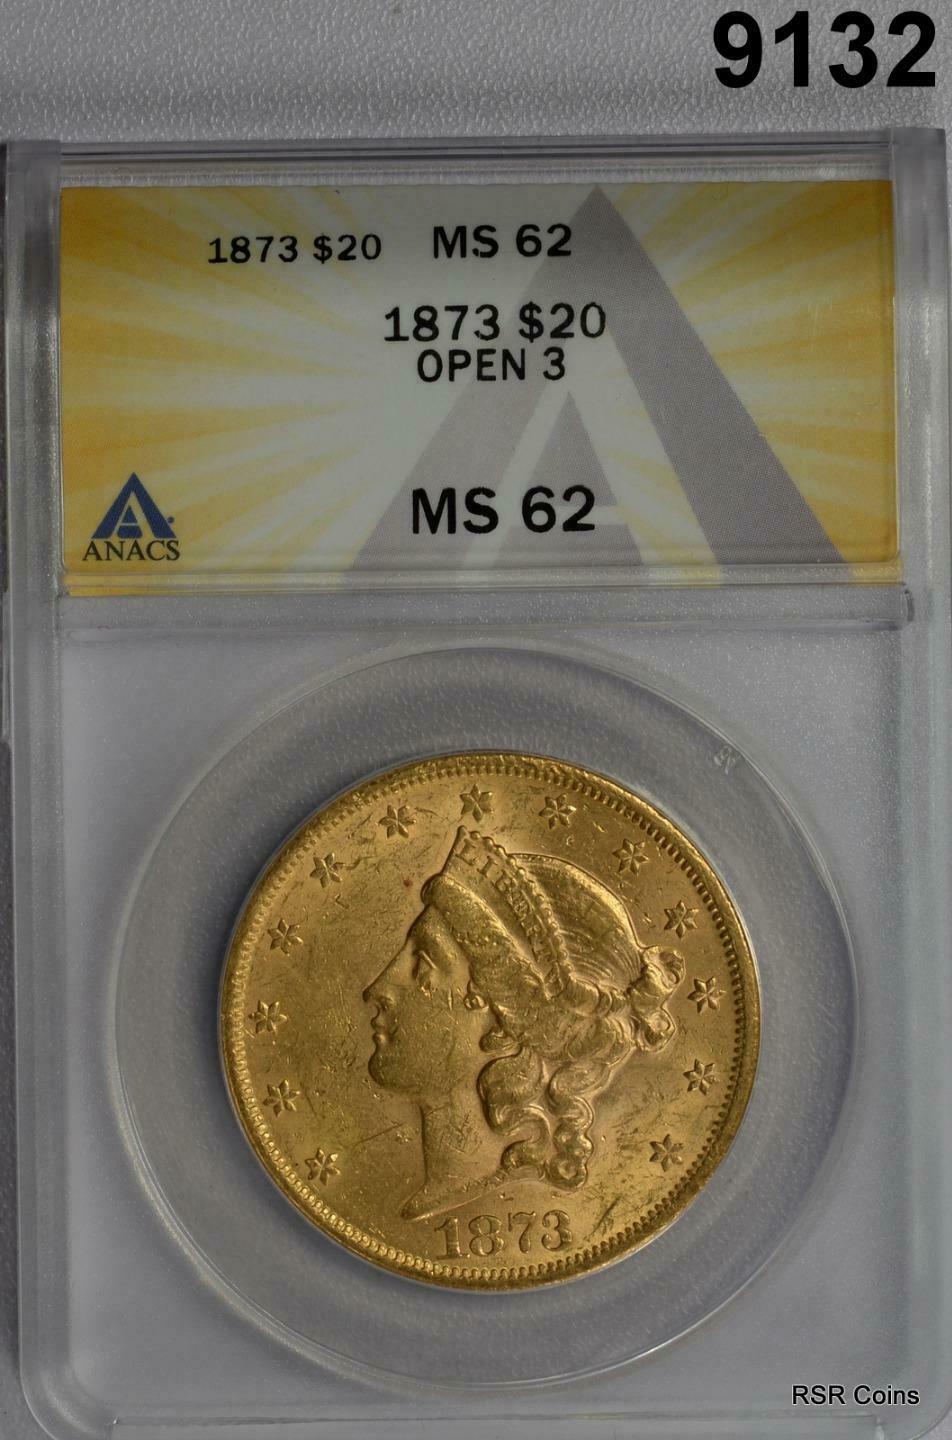 1873 OPEN 3 $20 GOLD LIBERTY ANACS CERTIFIED MS62 NICE LUSTER! #9132